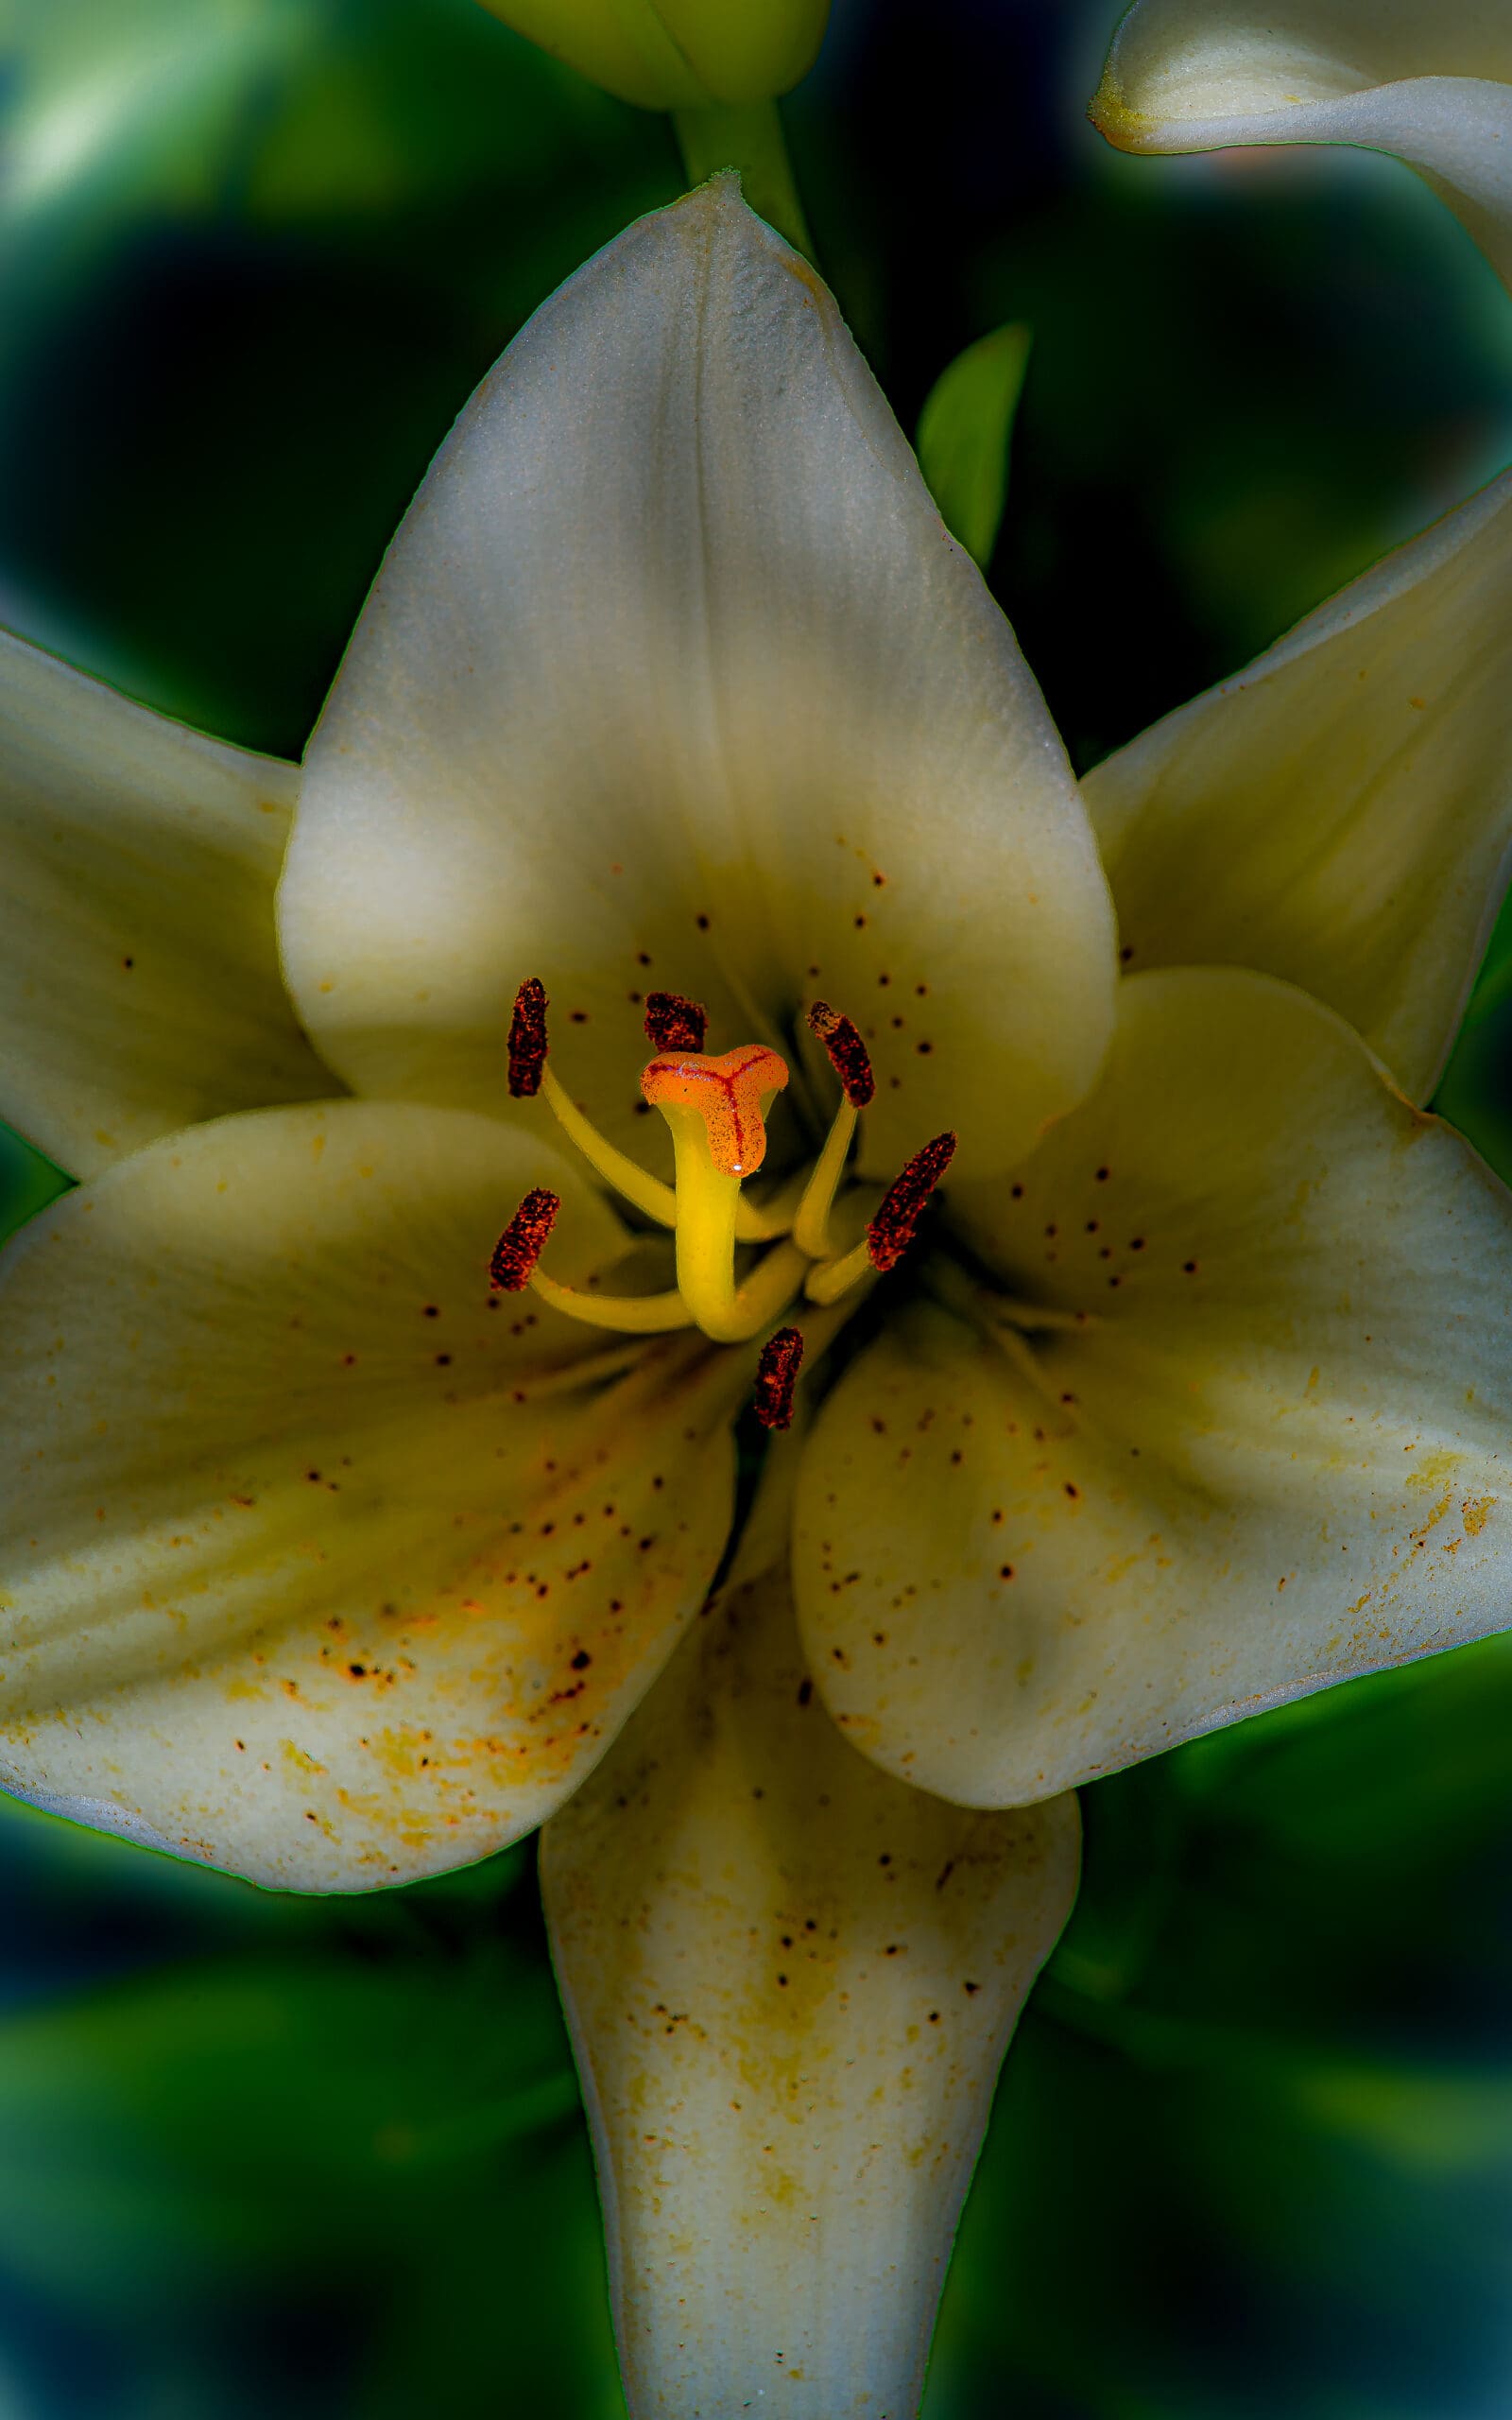 A Fine Art Photograph by artist Glen Couvillion. A close-up of a yellow Canada lily is seen in this image. It is a beautiful plant, with numerous petals that range in color from bright yellow to a more muted hue. The petals are intricately layered, with the center of the flower being the darkest shade of yellow.